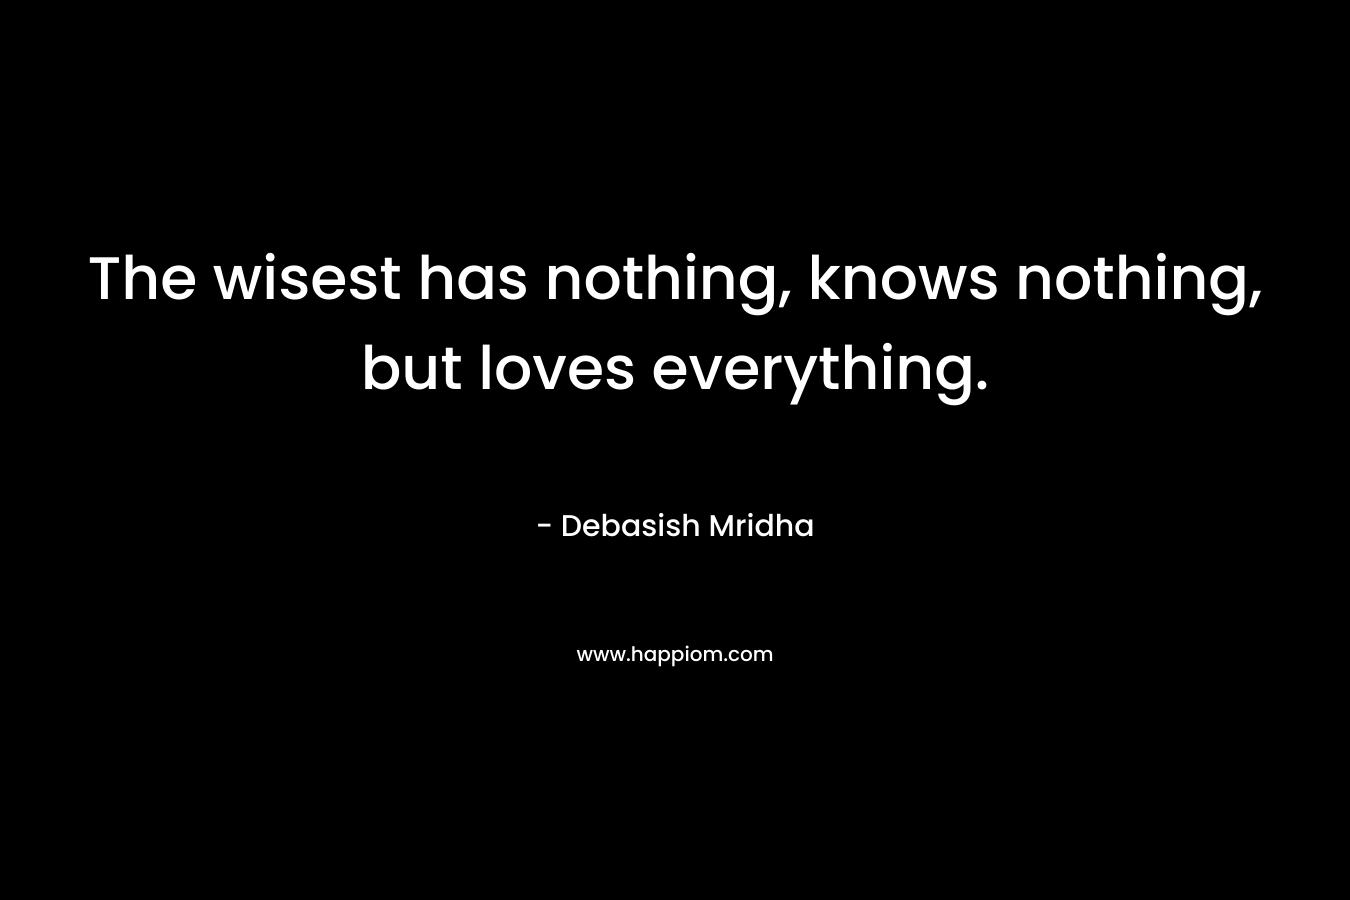 The wisest has nothing, knows nothing, but loves everything.